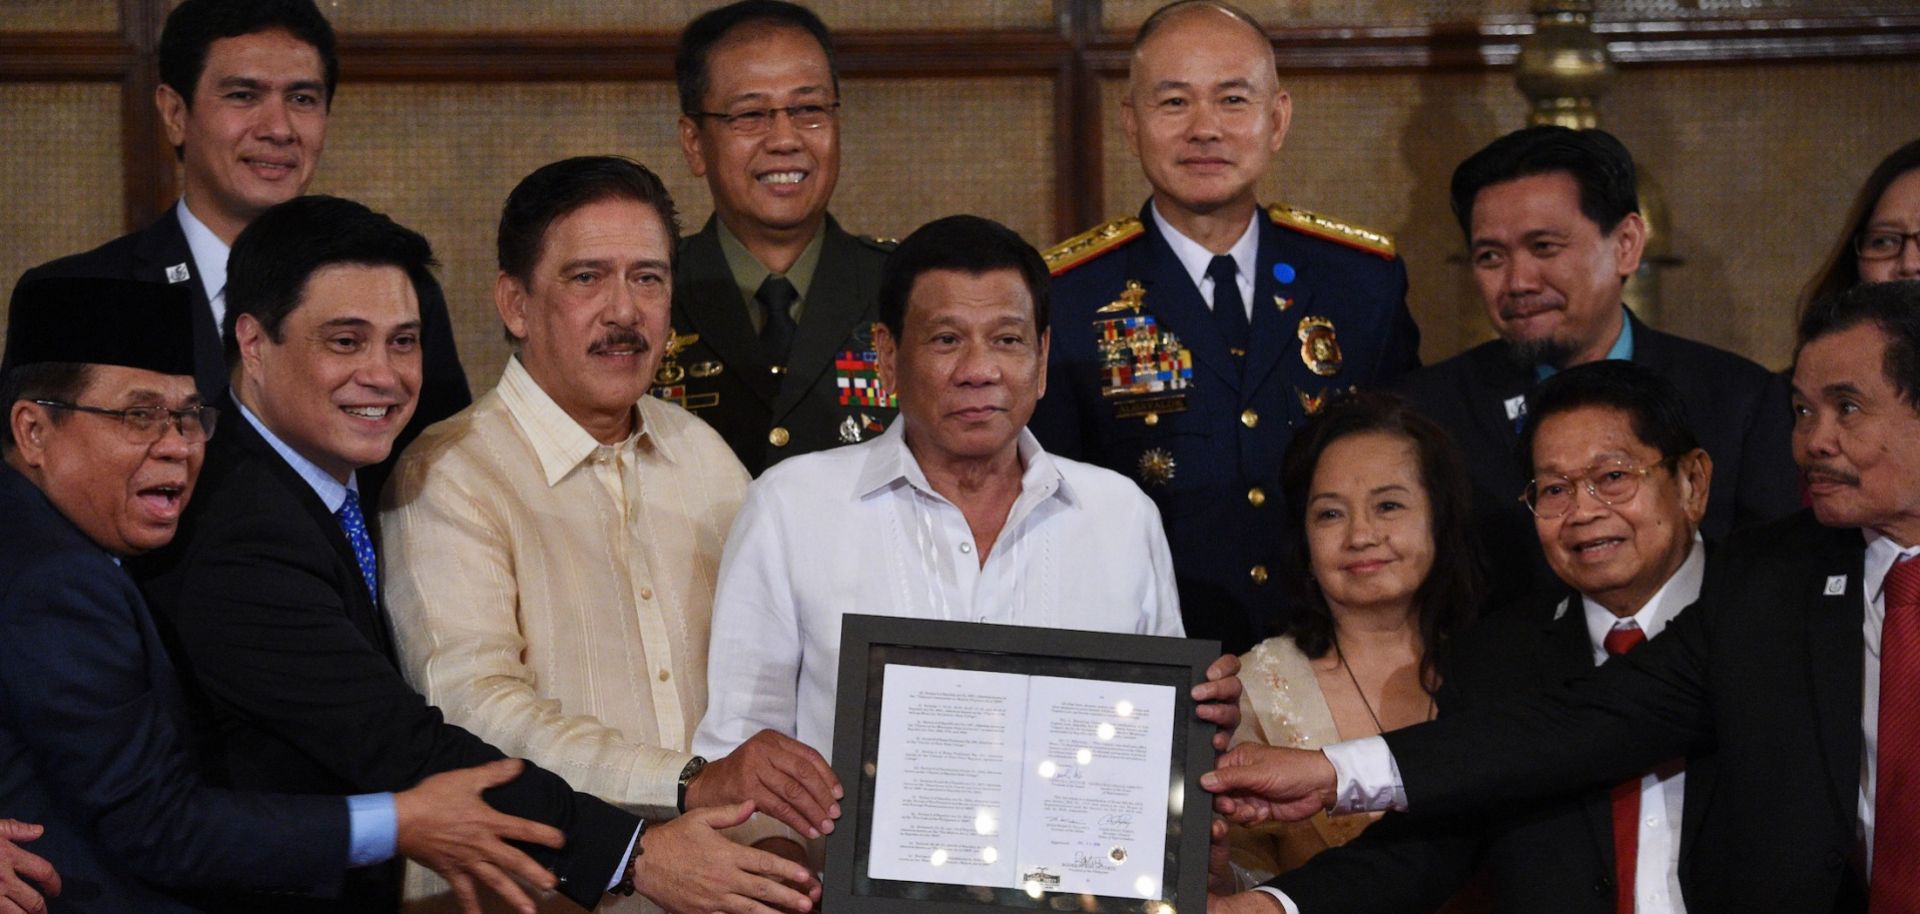 Philippine President Rodrigo Duterte, center, poses with lawmakers, leaders of the Moro Islamic Liberation Front and military and police officials during a presentation ceremony for the new Bangsamoro law in Manila on Aug. 6, 2018.